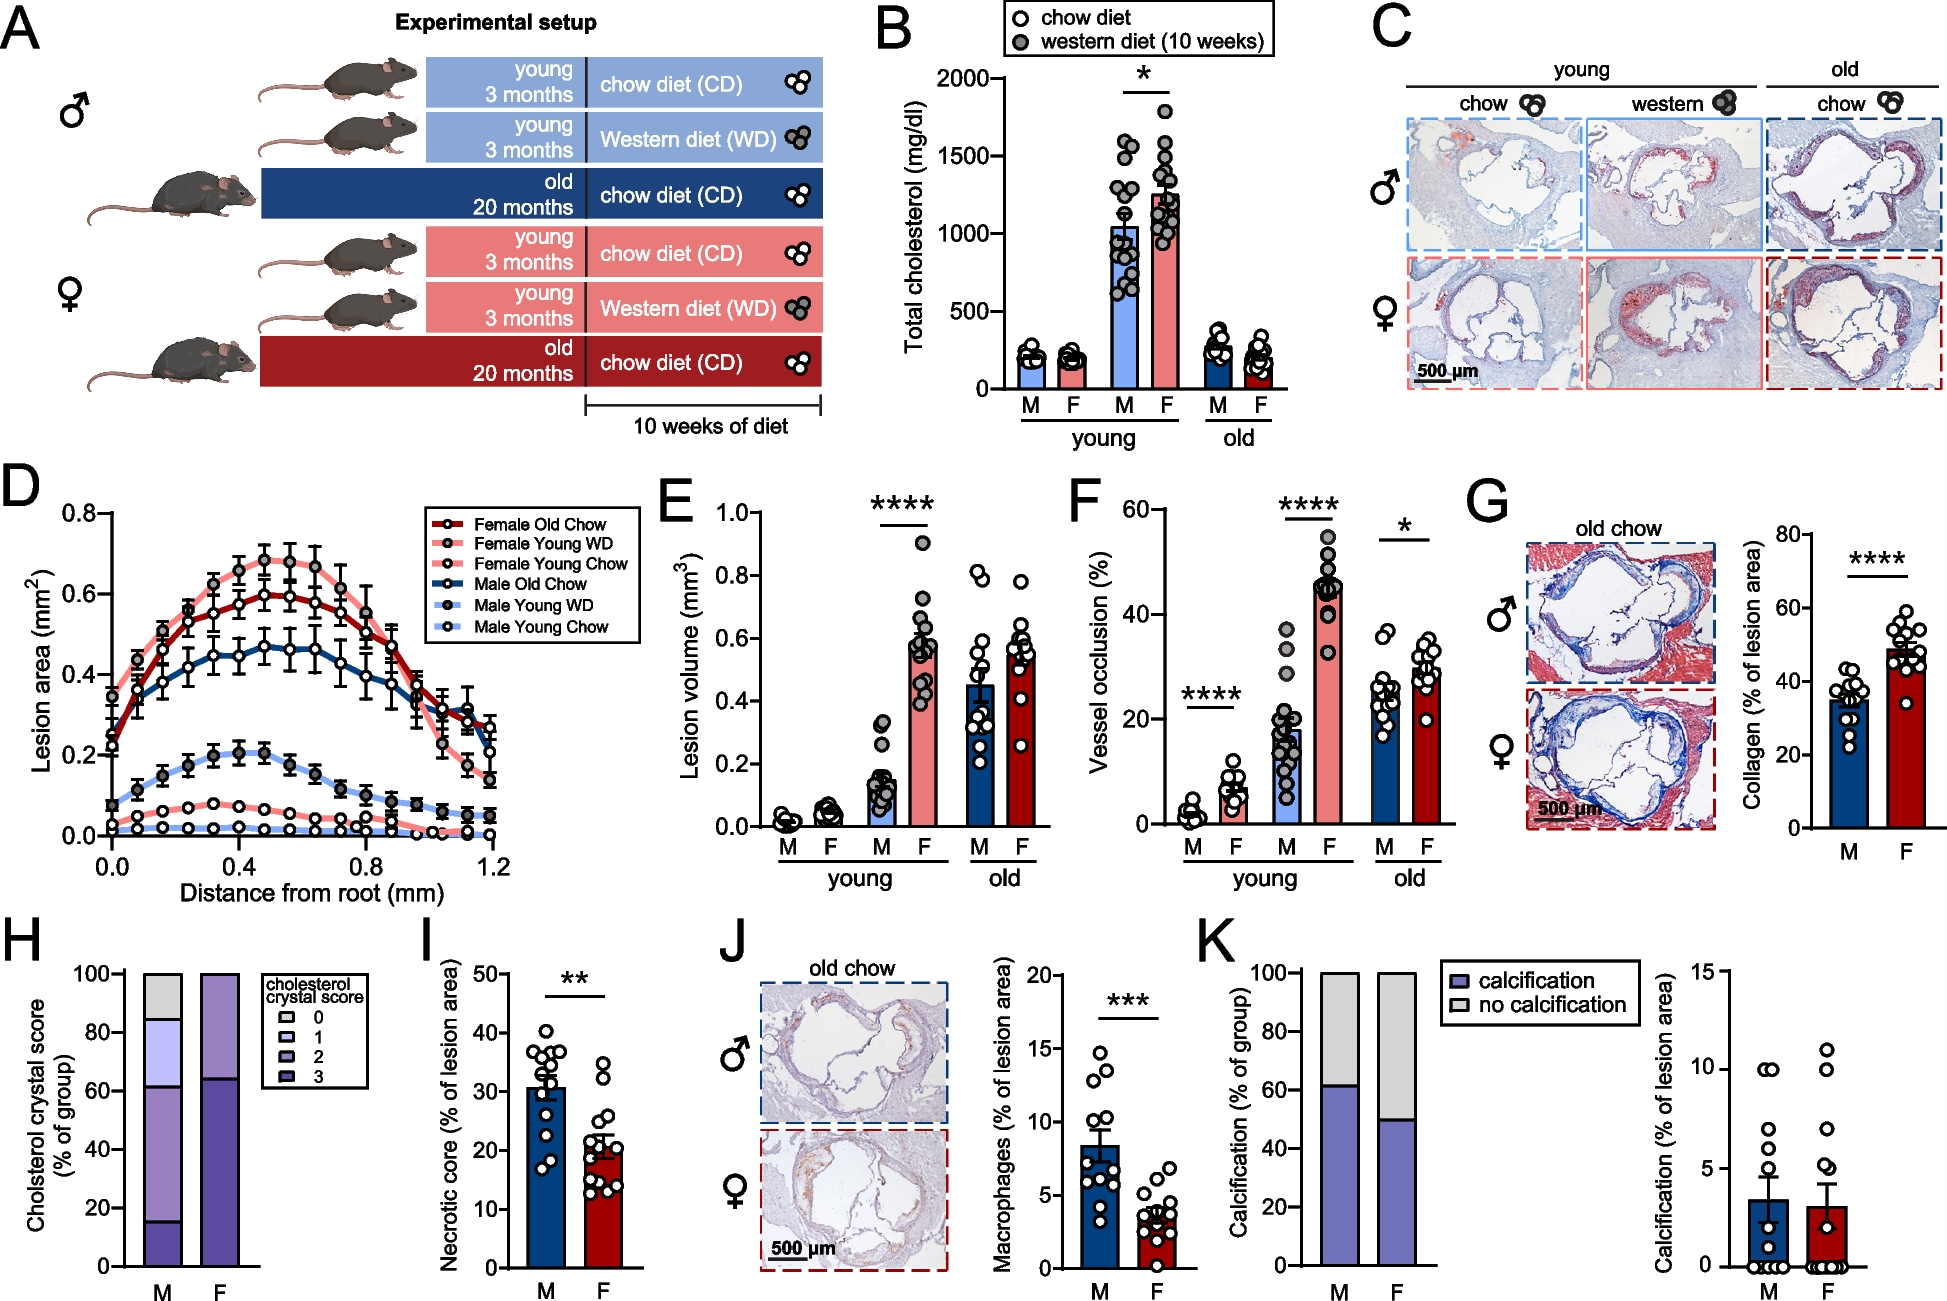 Sexual dimorphism in atherosclerotic plaques of aged Ldlr−/− mice